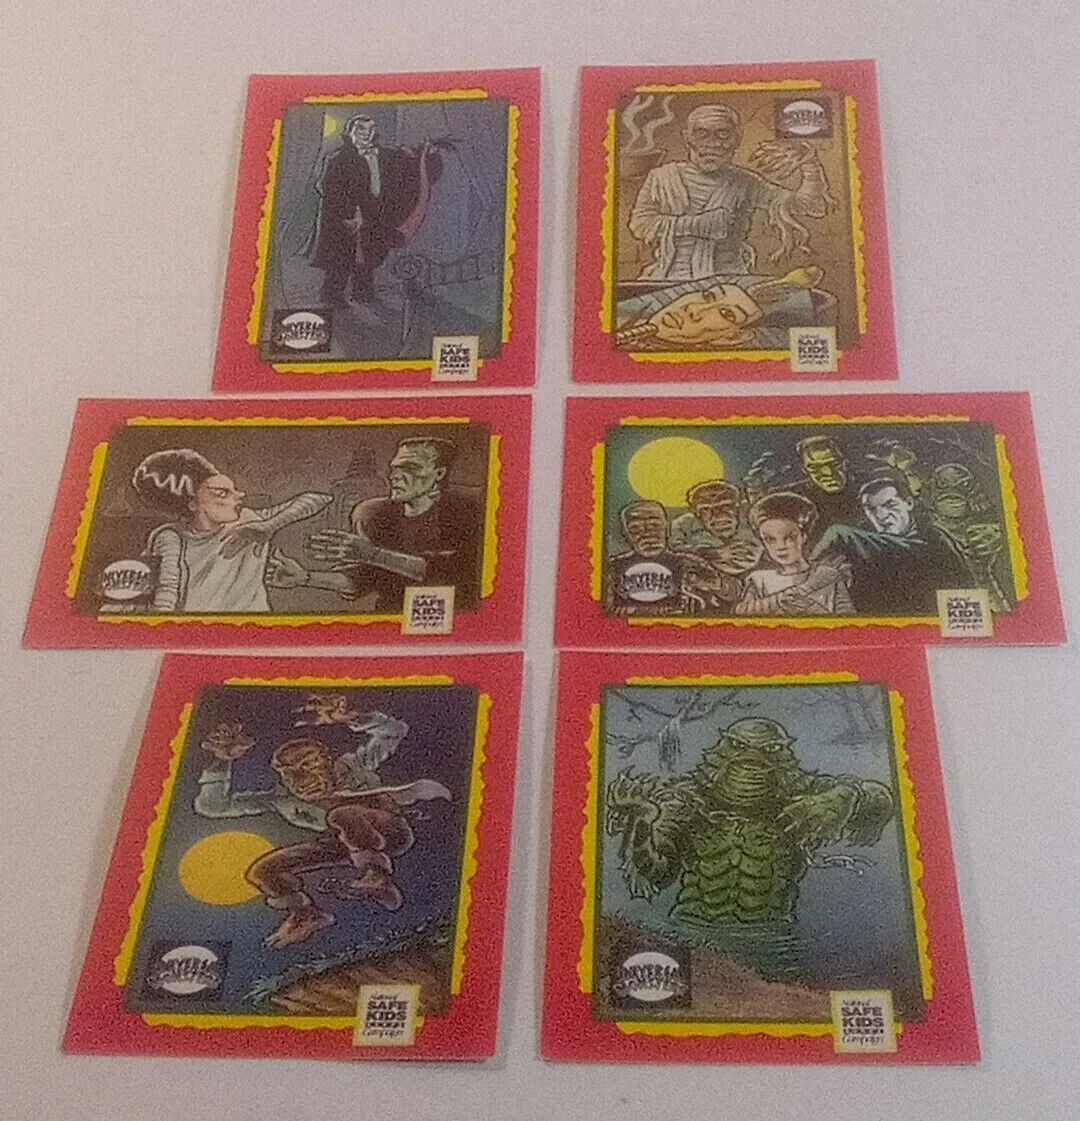 Vintage Universal Monsters Trading Card Treats Complete Set 6 Cards Impel 1991